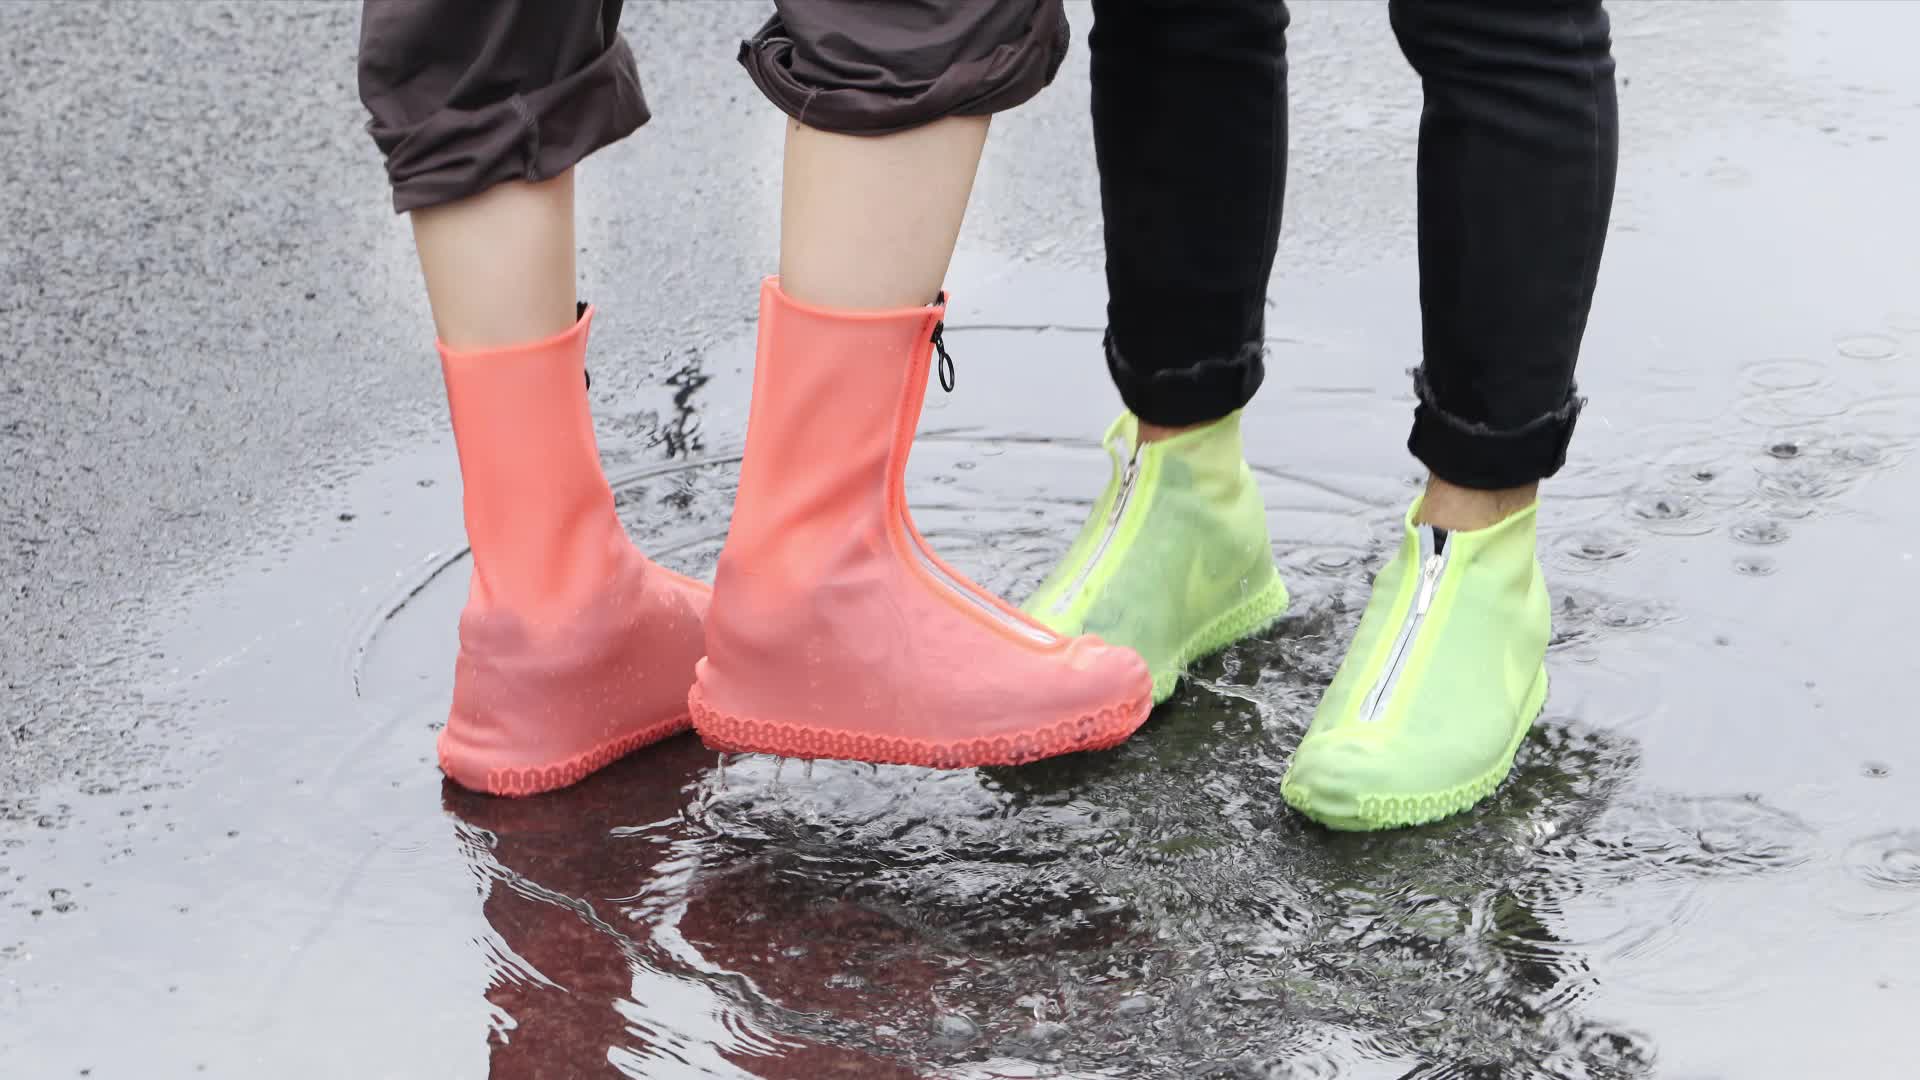 Details about   Outdoor Waterproof Rubber Rain Shoe Covers Reusable Latex Overshoes Accessories 